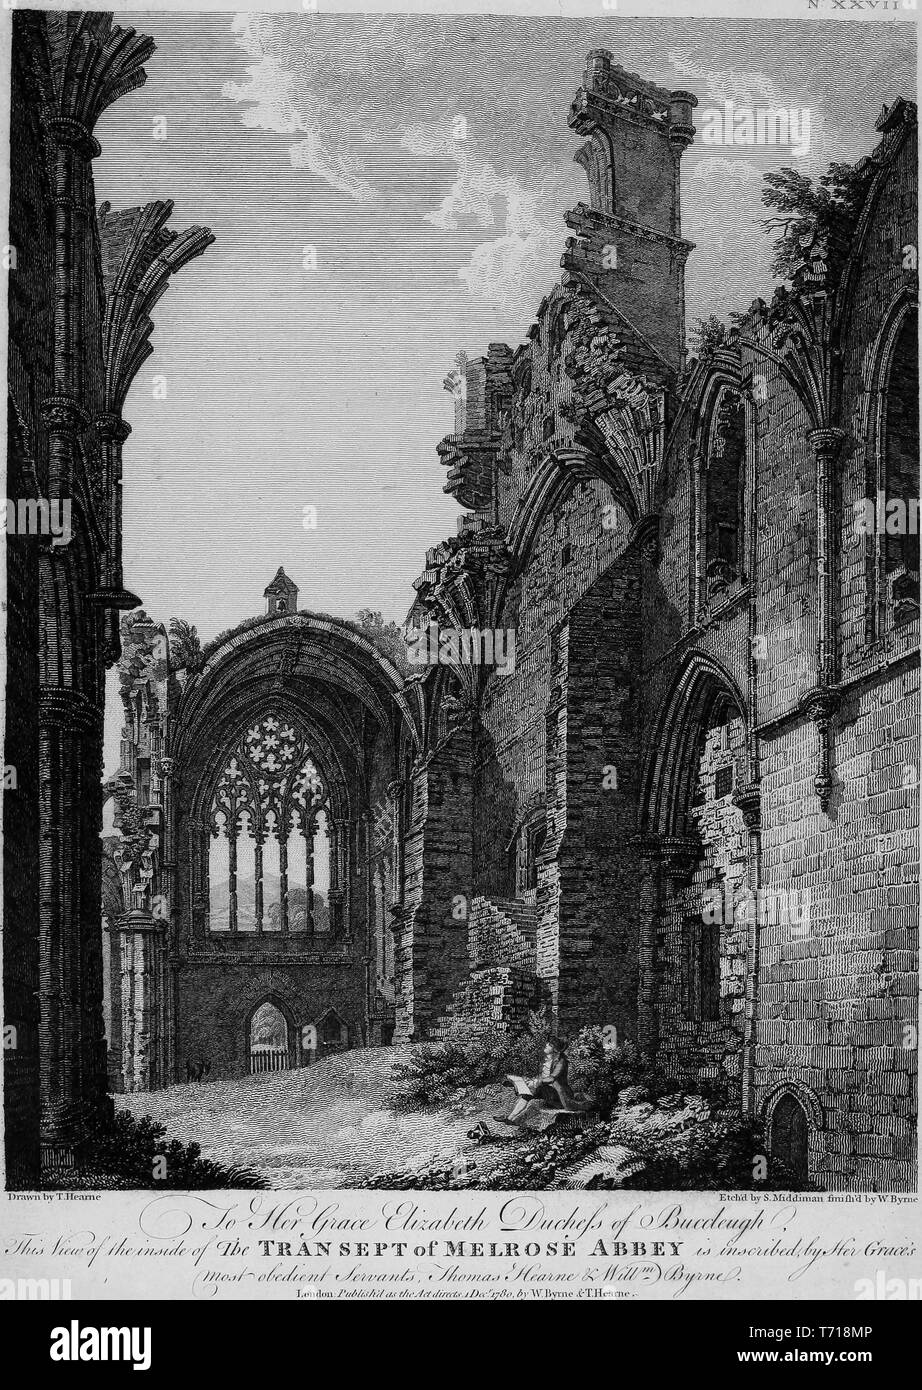 Engraving of the transept of Melrose Abbey in Melrose, Roxburghshire, Scotland, from the book 'Antiquities of Great Britain' by William Byrne and Thomas Hearne, 1807. Courtesy Internet Archive. () Stock Photo